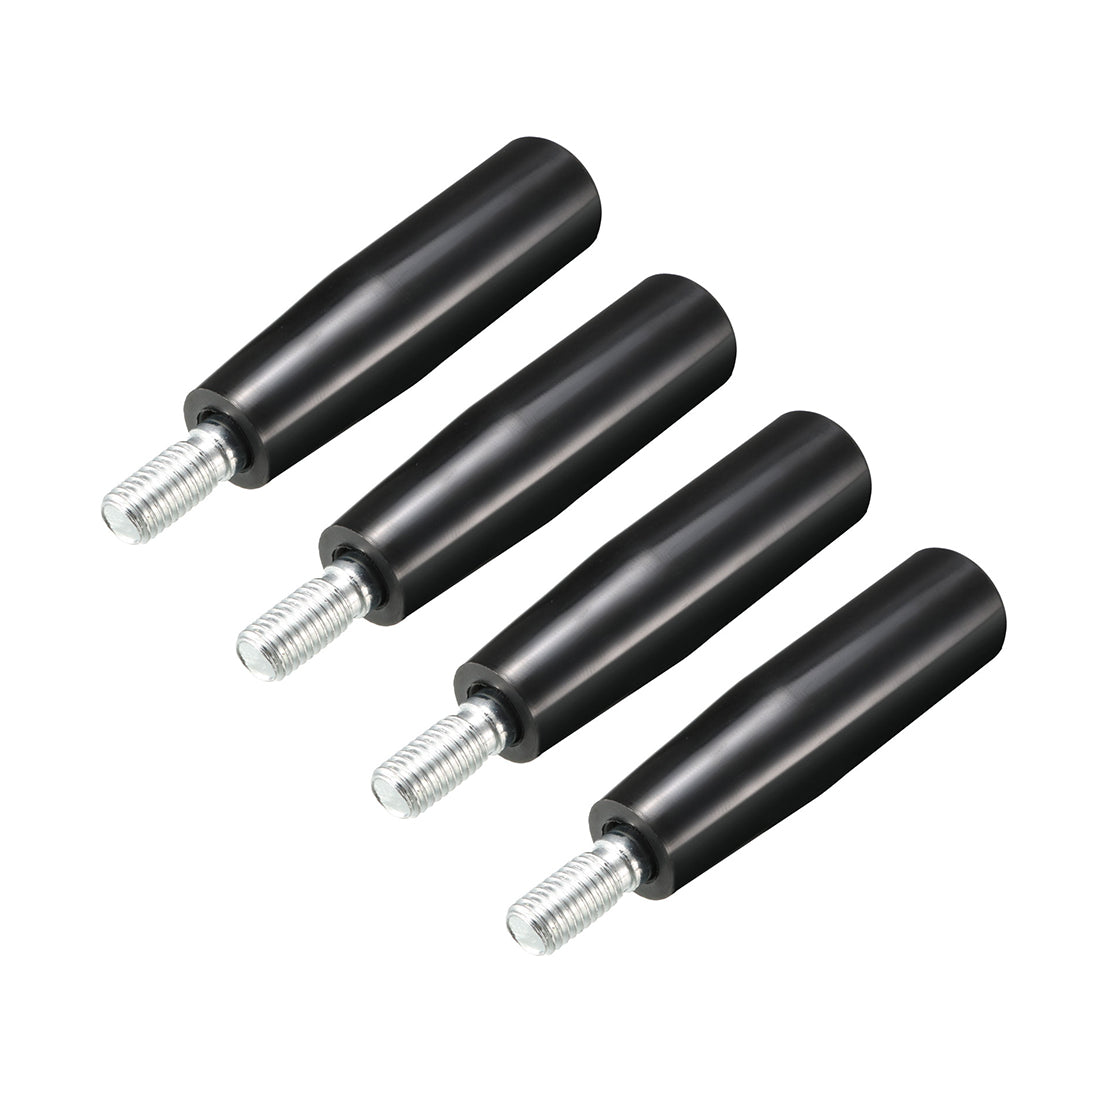 uxcell Uxcell 4Pcs Revolving Handwheel Machine Handle M12 Male Threaded Stem for Milling Machinery